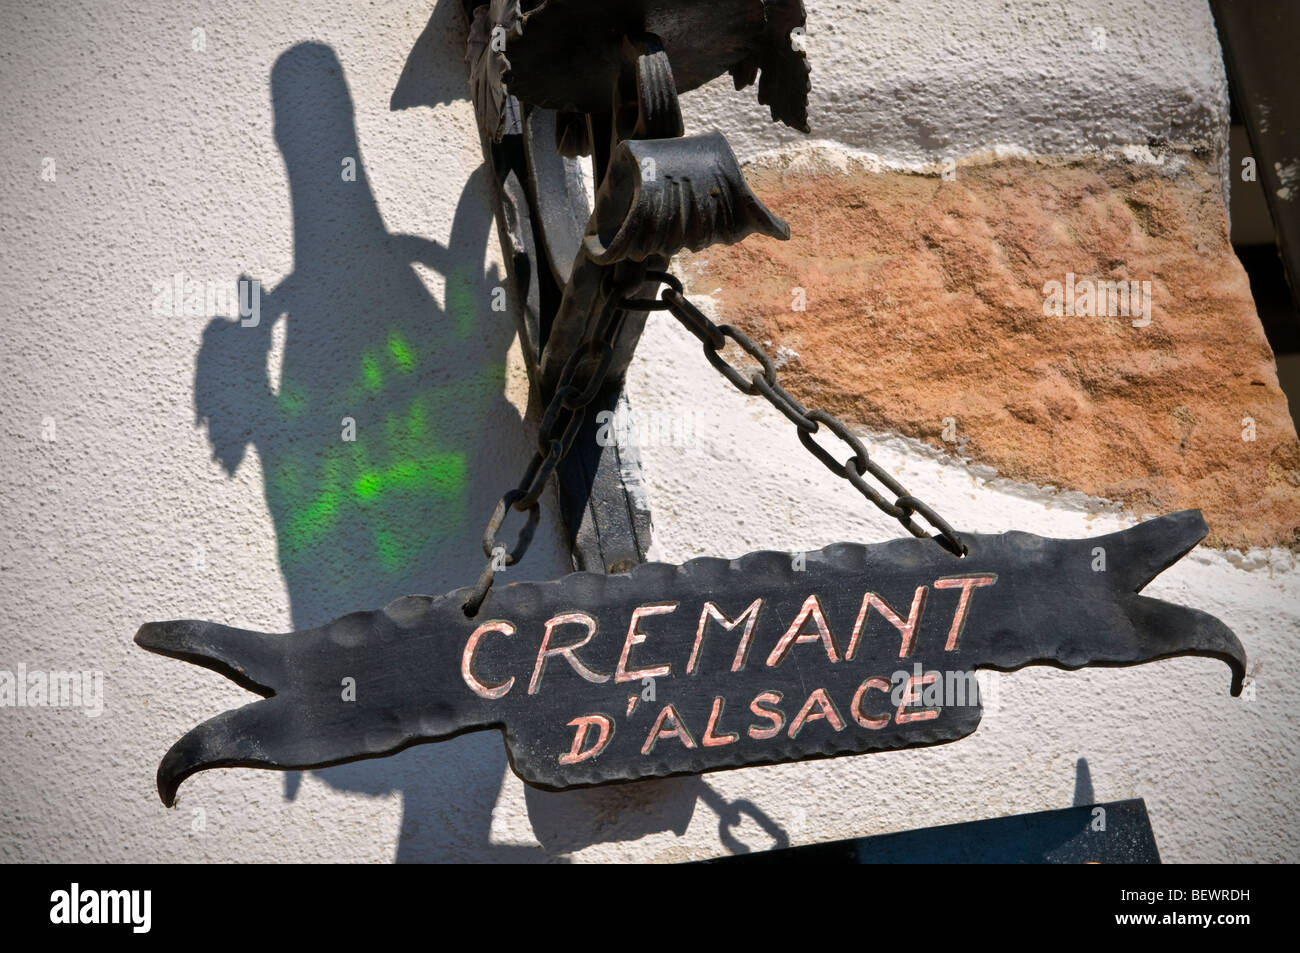 CREMANT D’ALSACE  Silhouette and ornate signage of local speciality 'Cremant d'Alsace' bottle at entrance to winery in Kaysersberg Alsace France Stock Photo